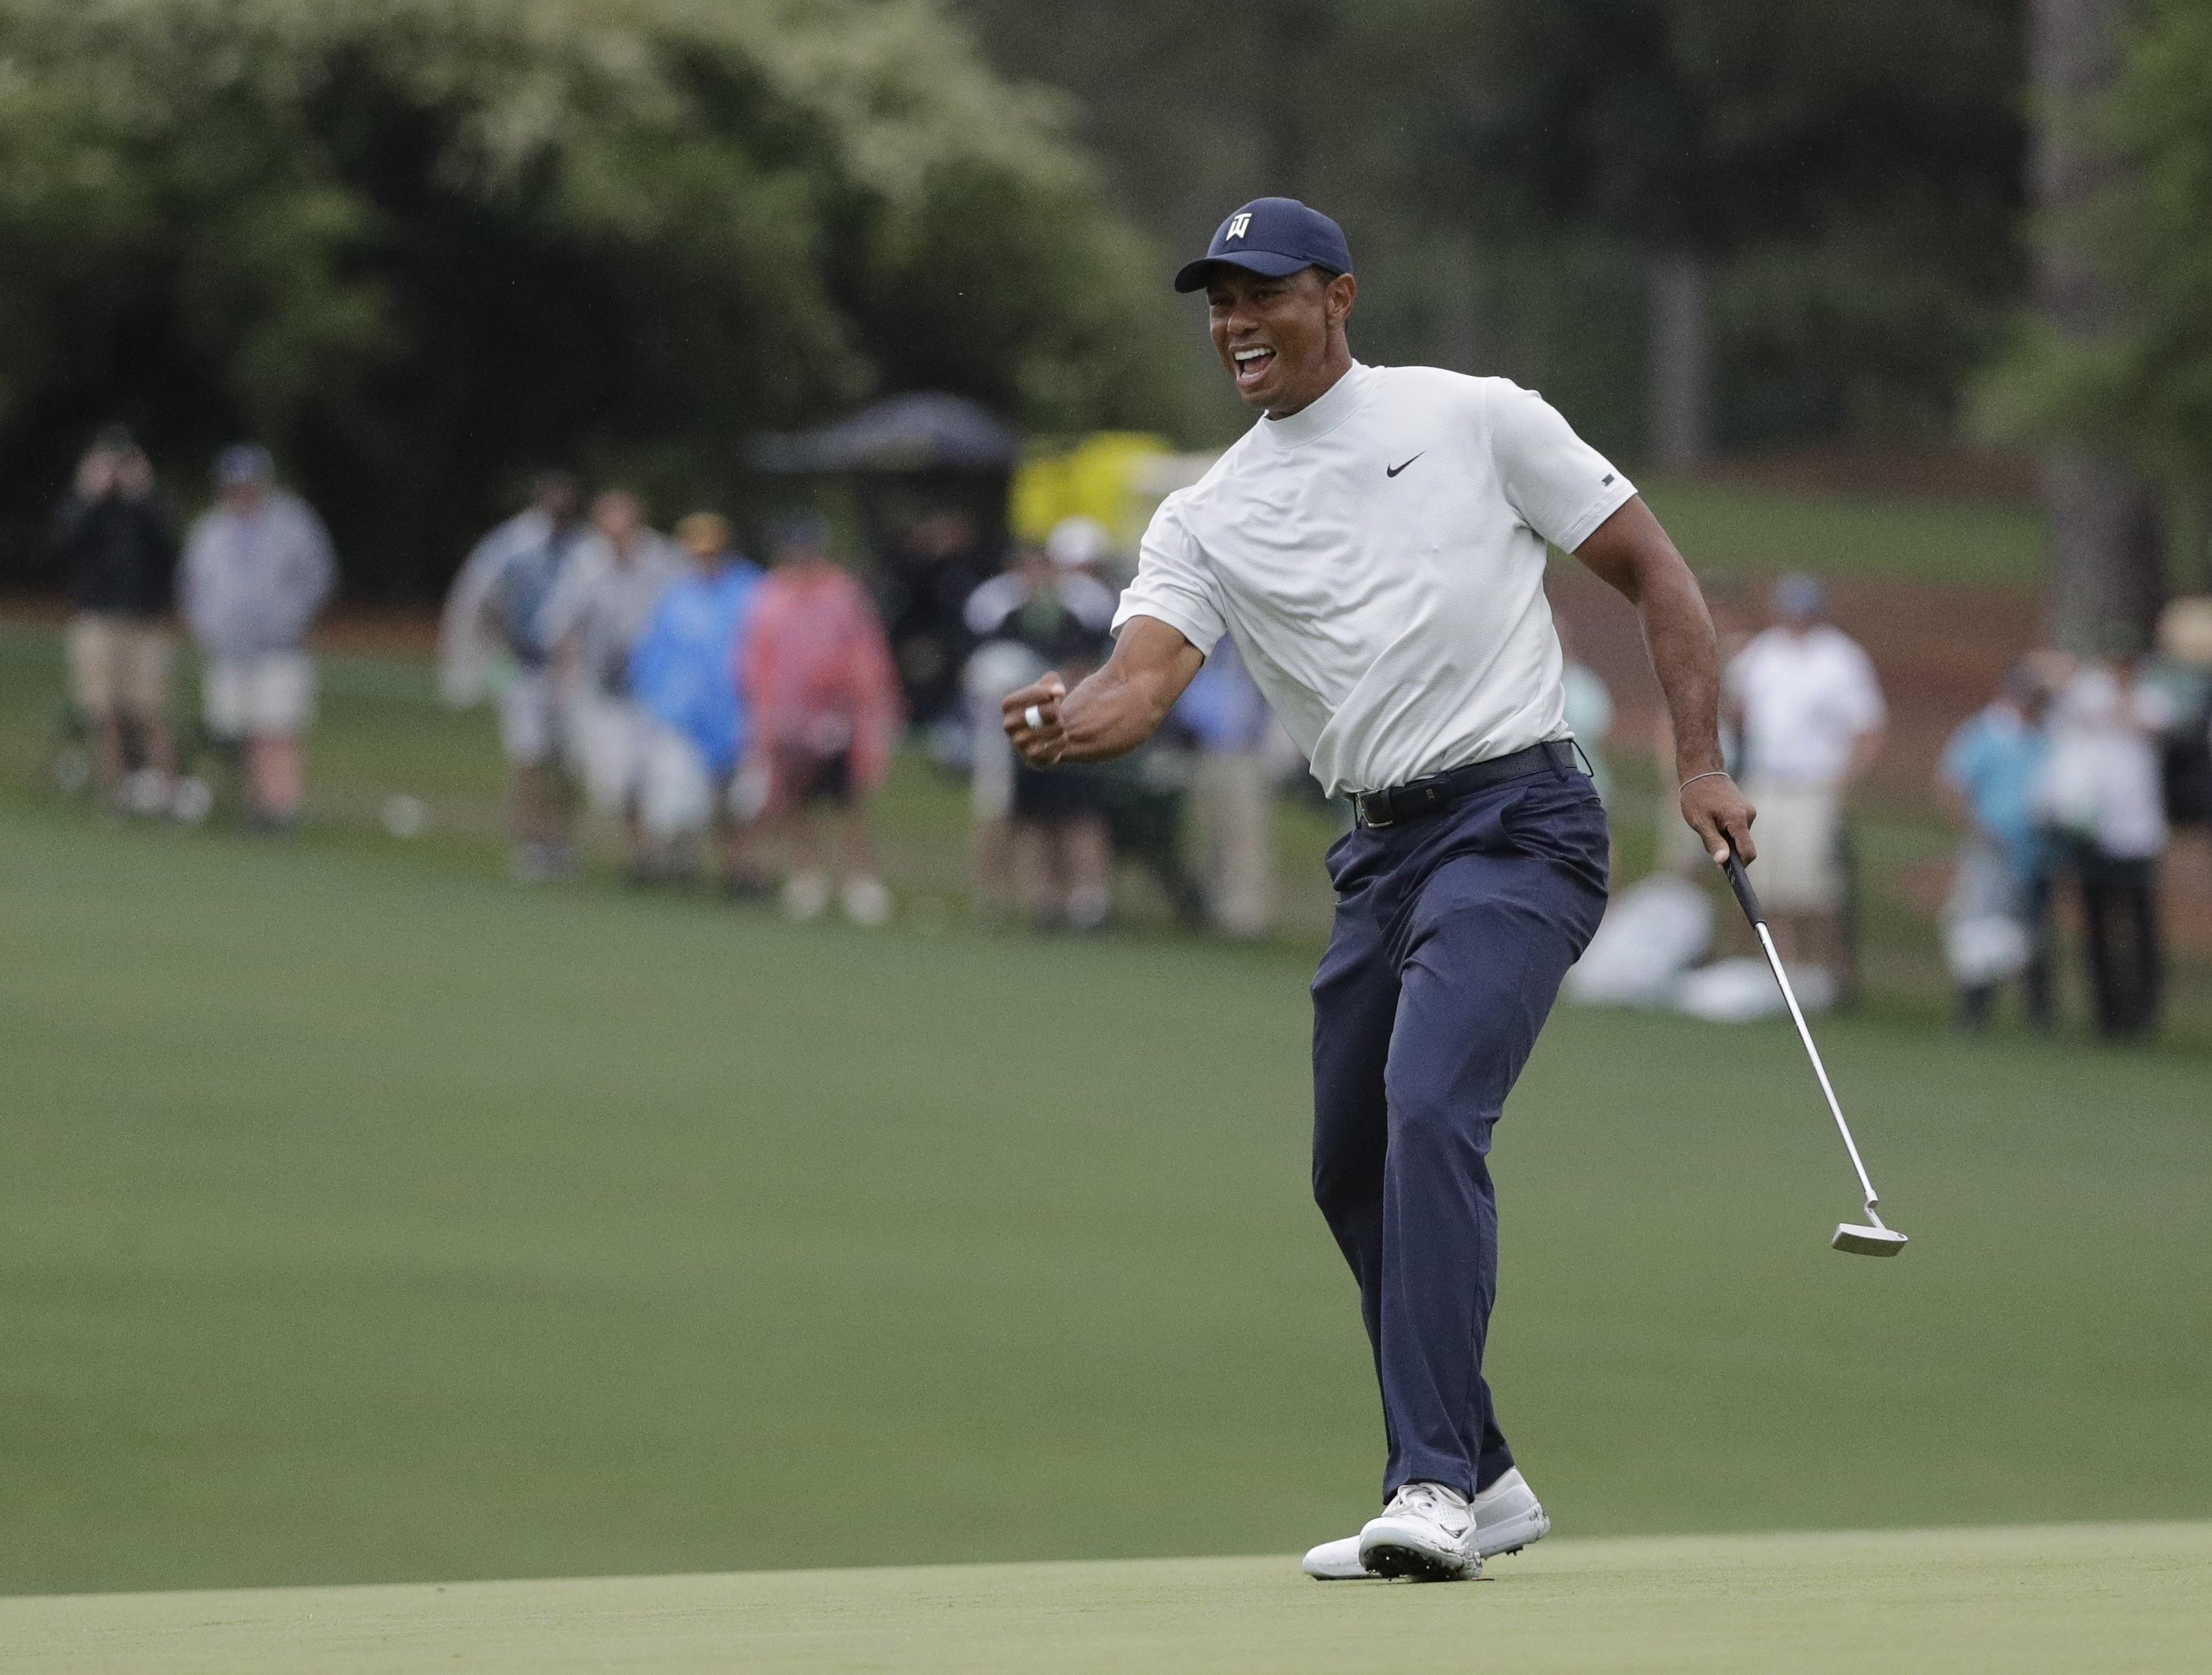 Tiger Woods makes a Masters logjam look even larger | The Spokesman-Review